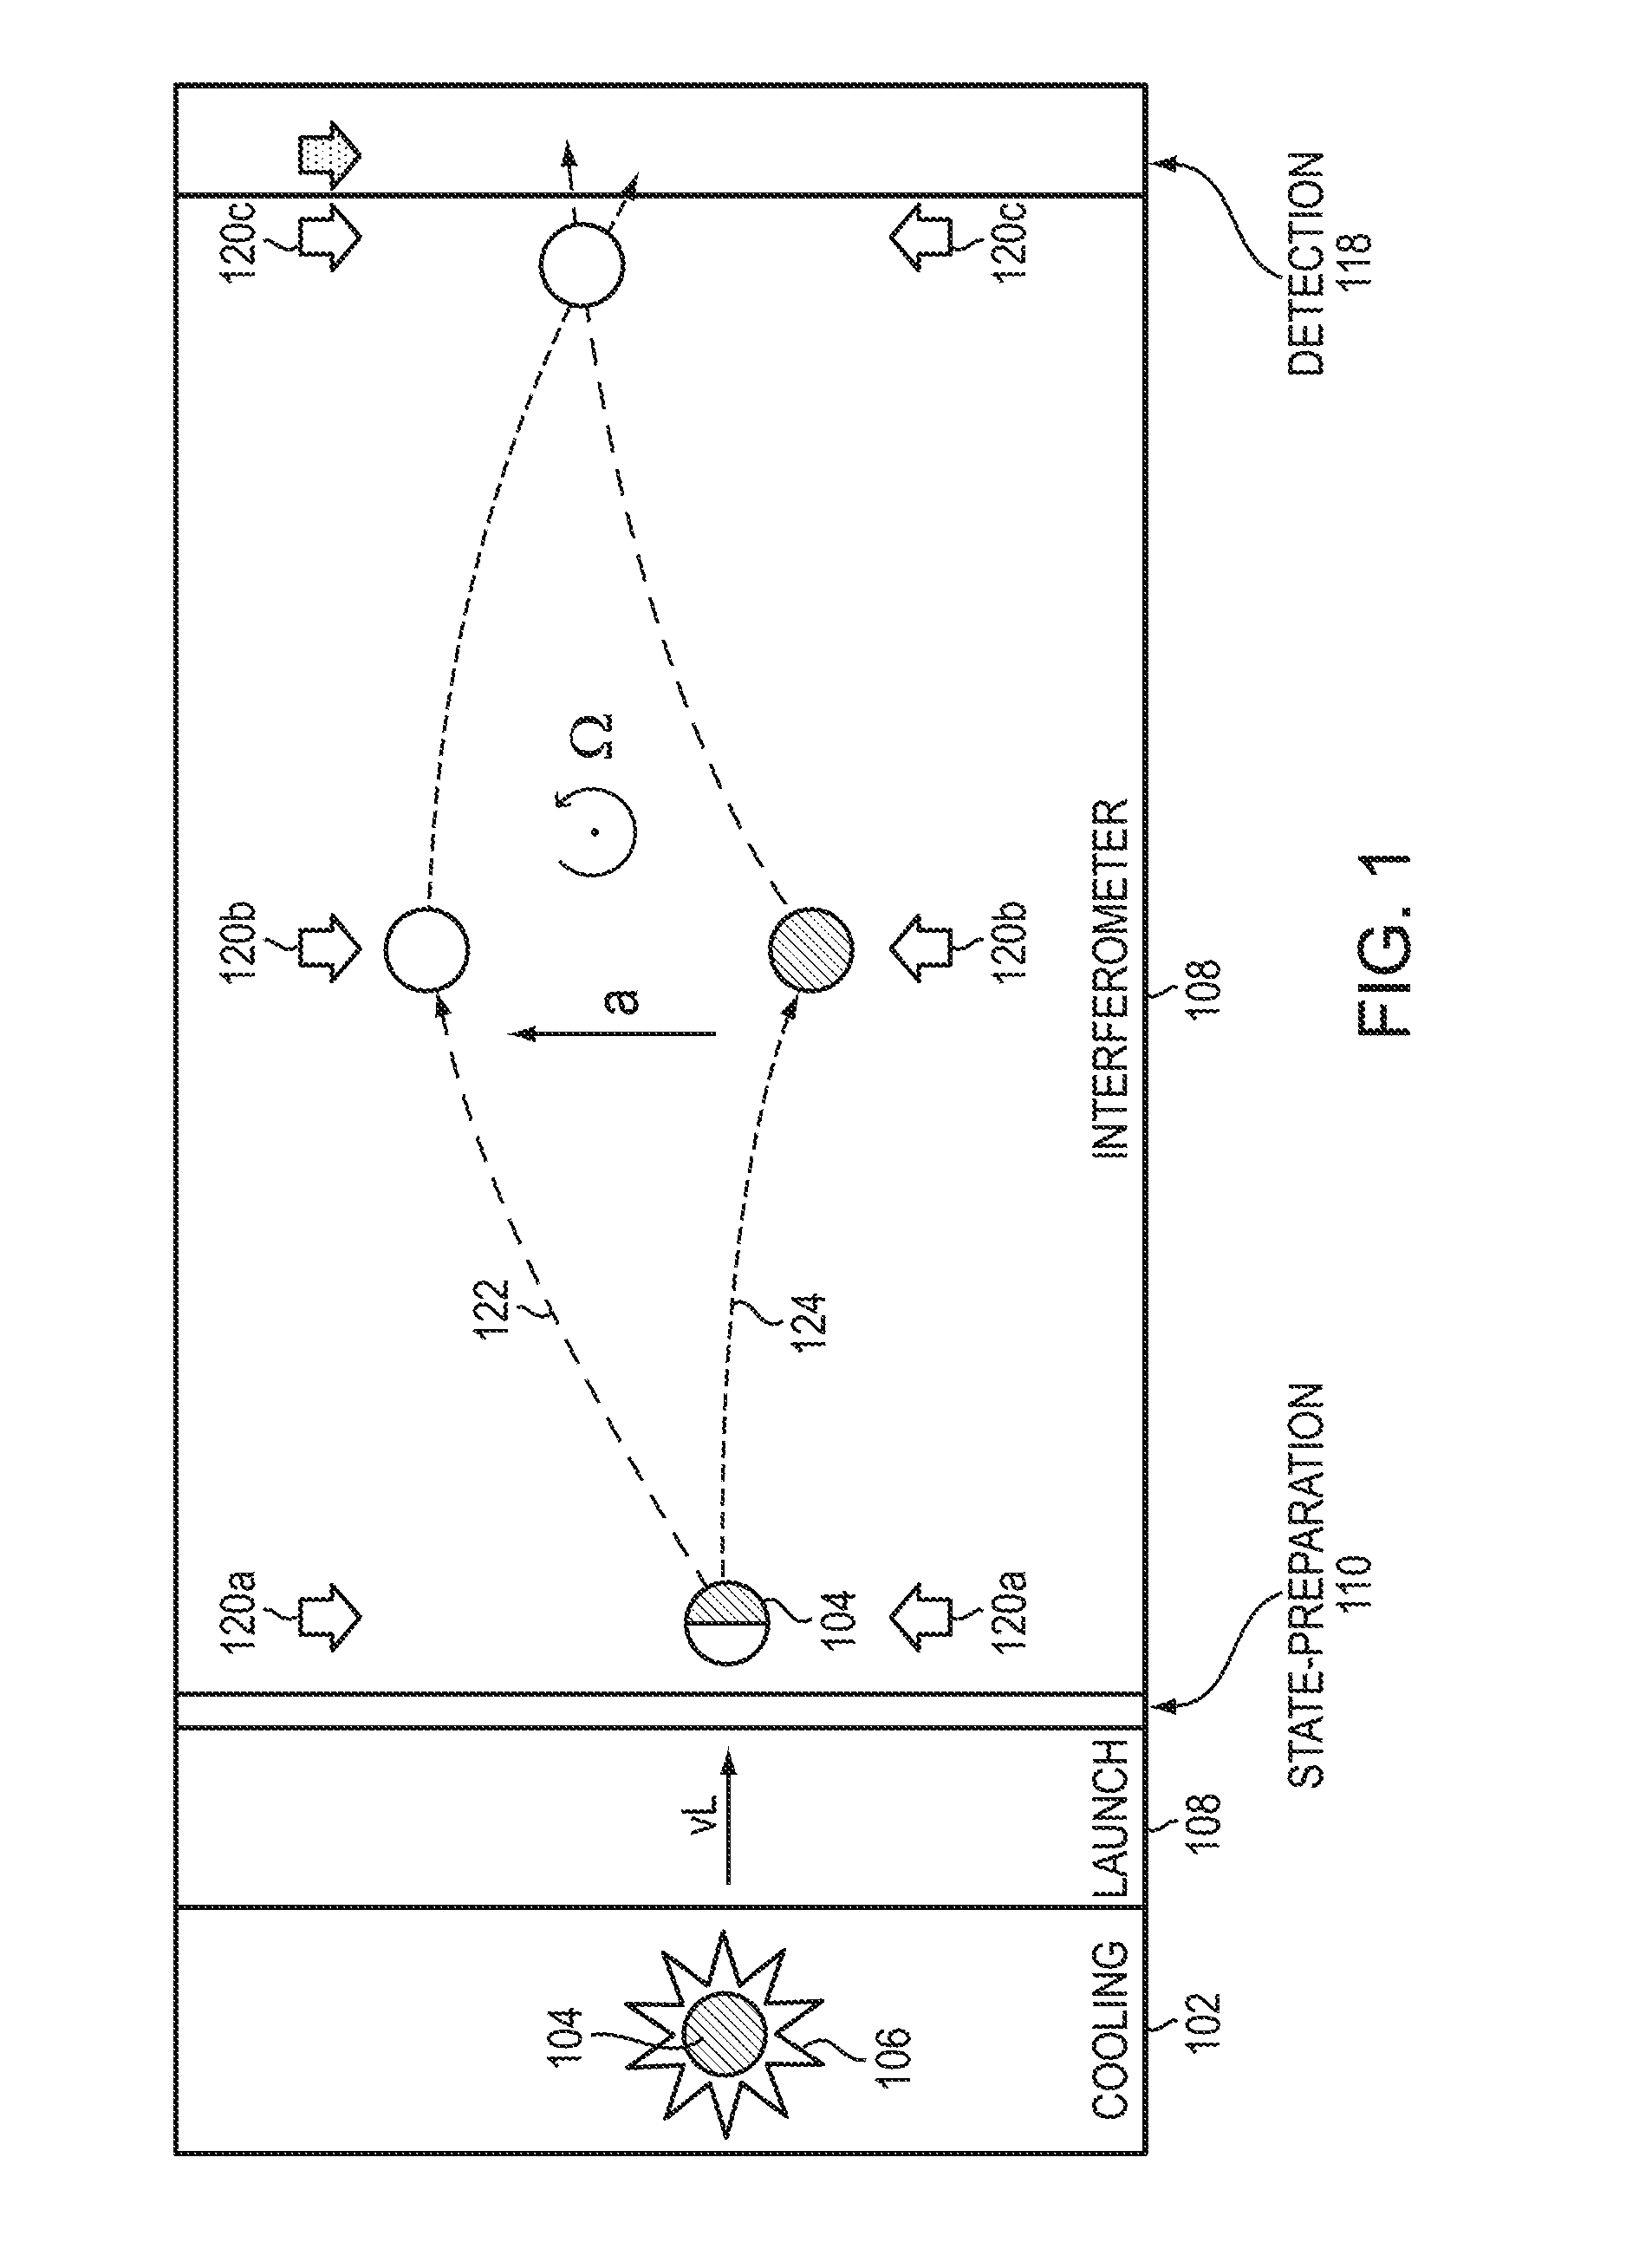 Ring architecture for sequential operation of an atomic gyroscope